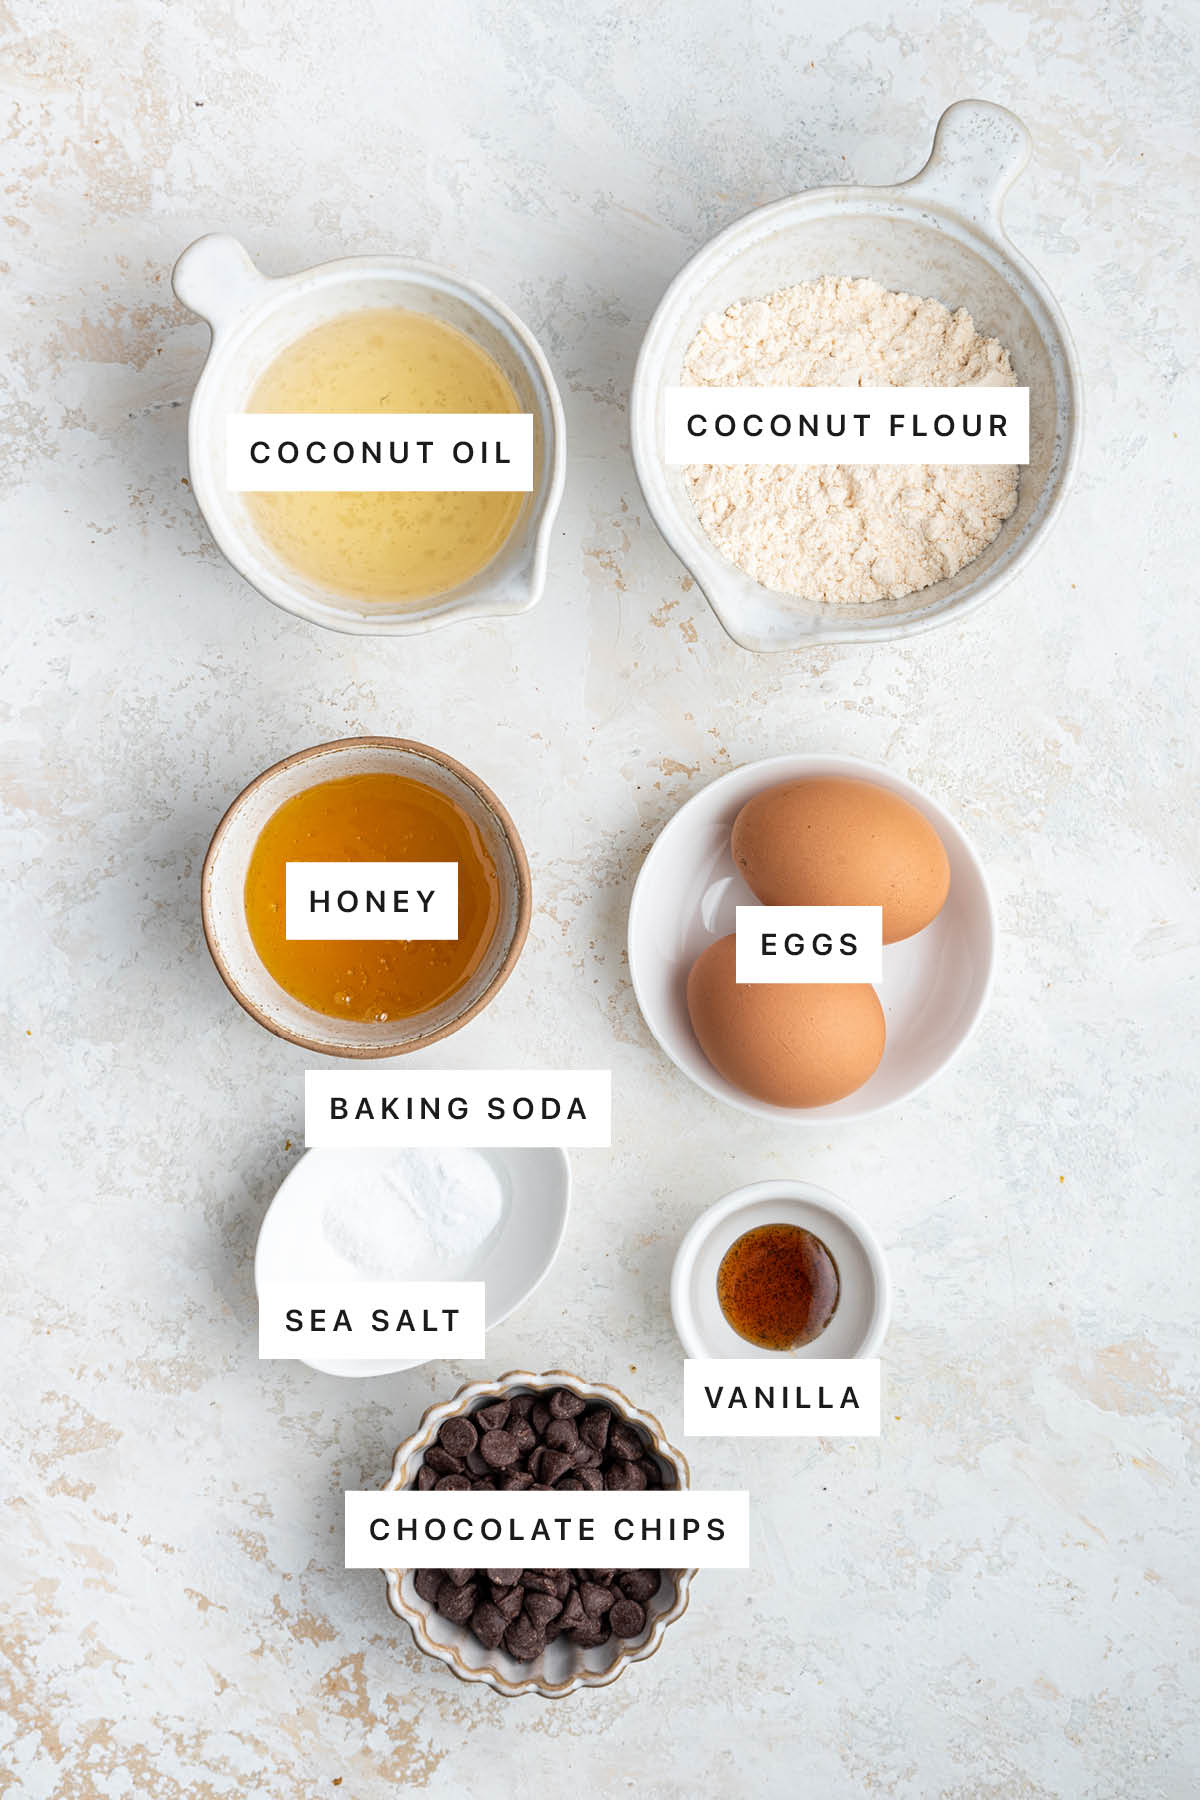 Ingredients measured out to make Coconut Flour Cookies: coconut oil, coconut flour, honey, eggs, baking soda, sea salt, vanilla and chocolate chips.